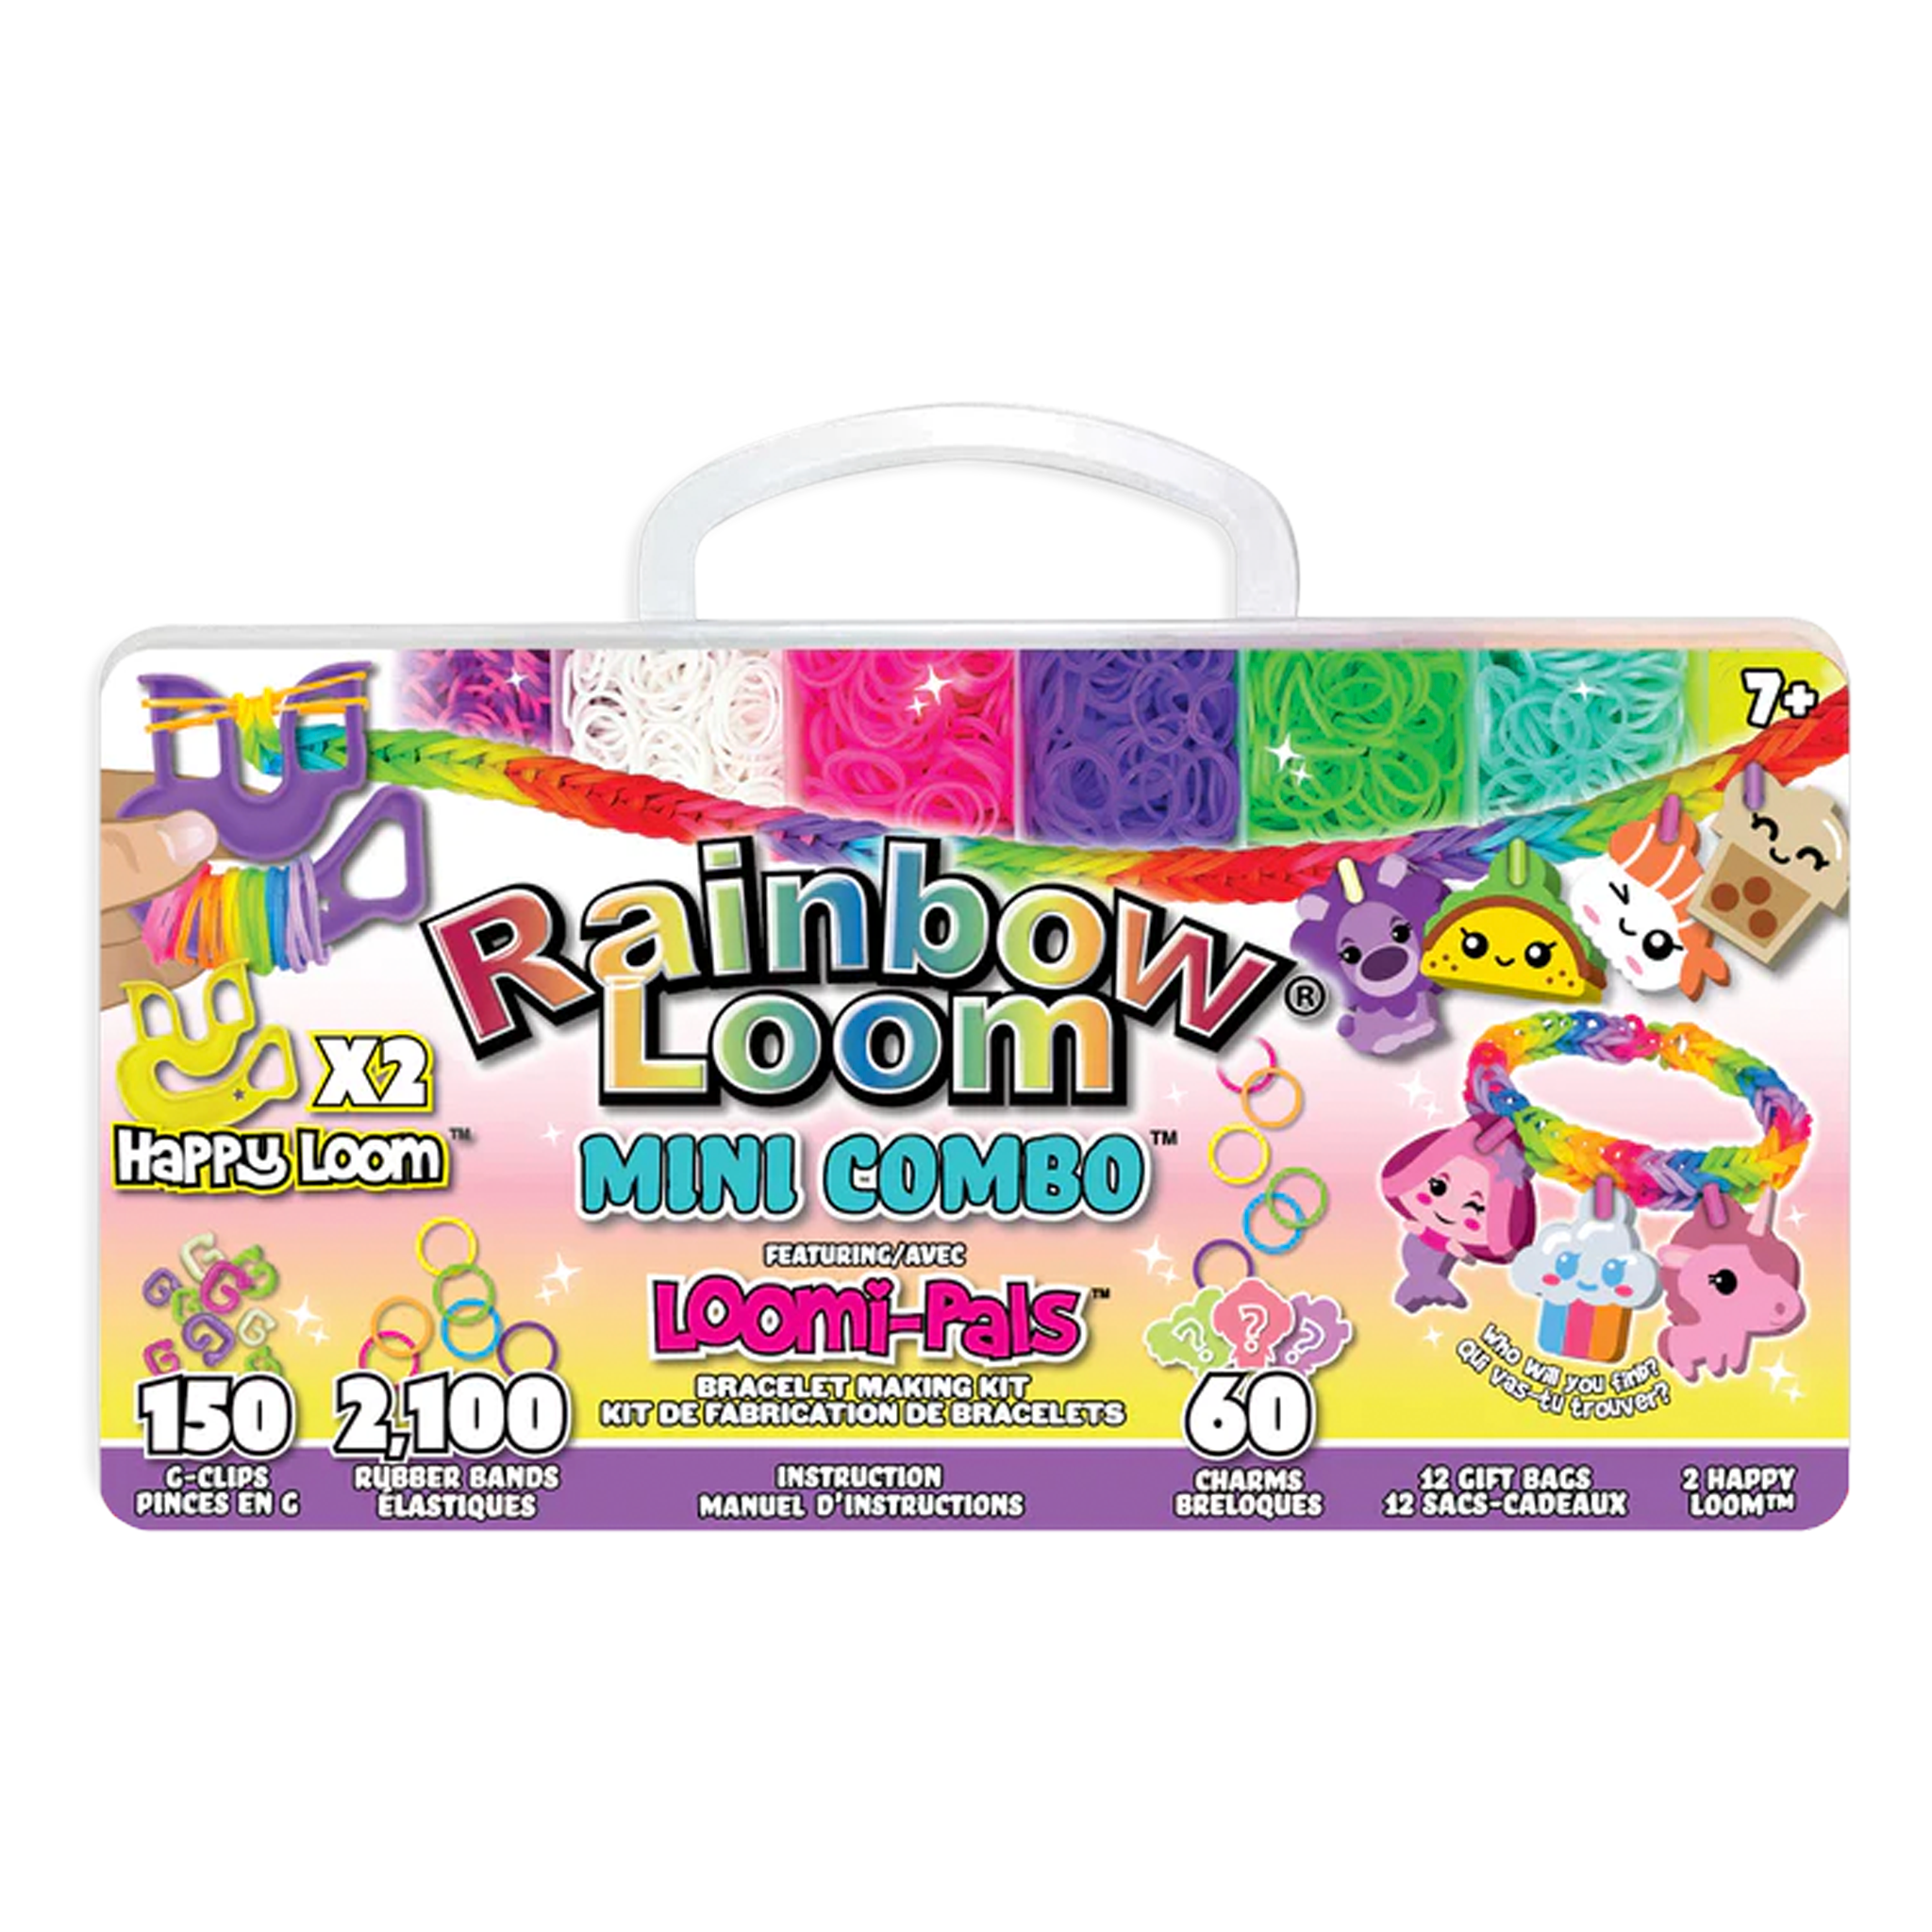 Loomi-Pals™ Combo Unboxing by Rainbow Loom® 